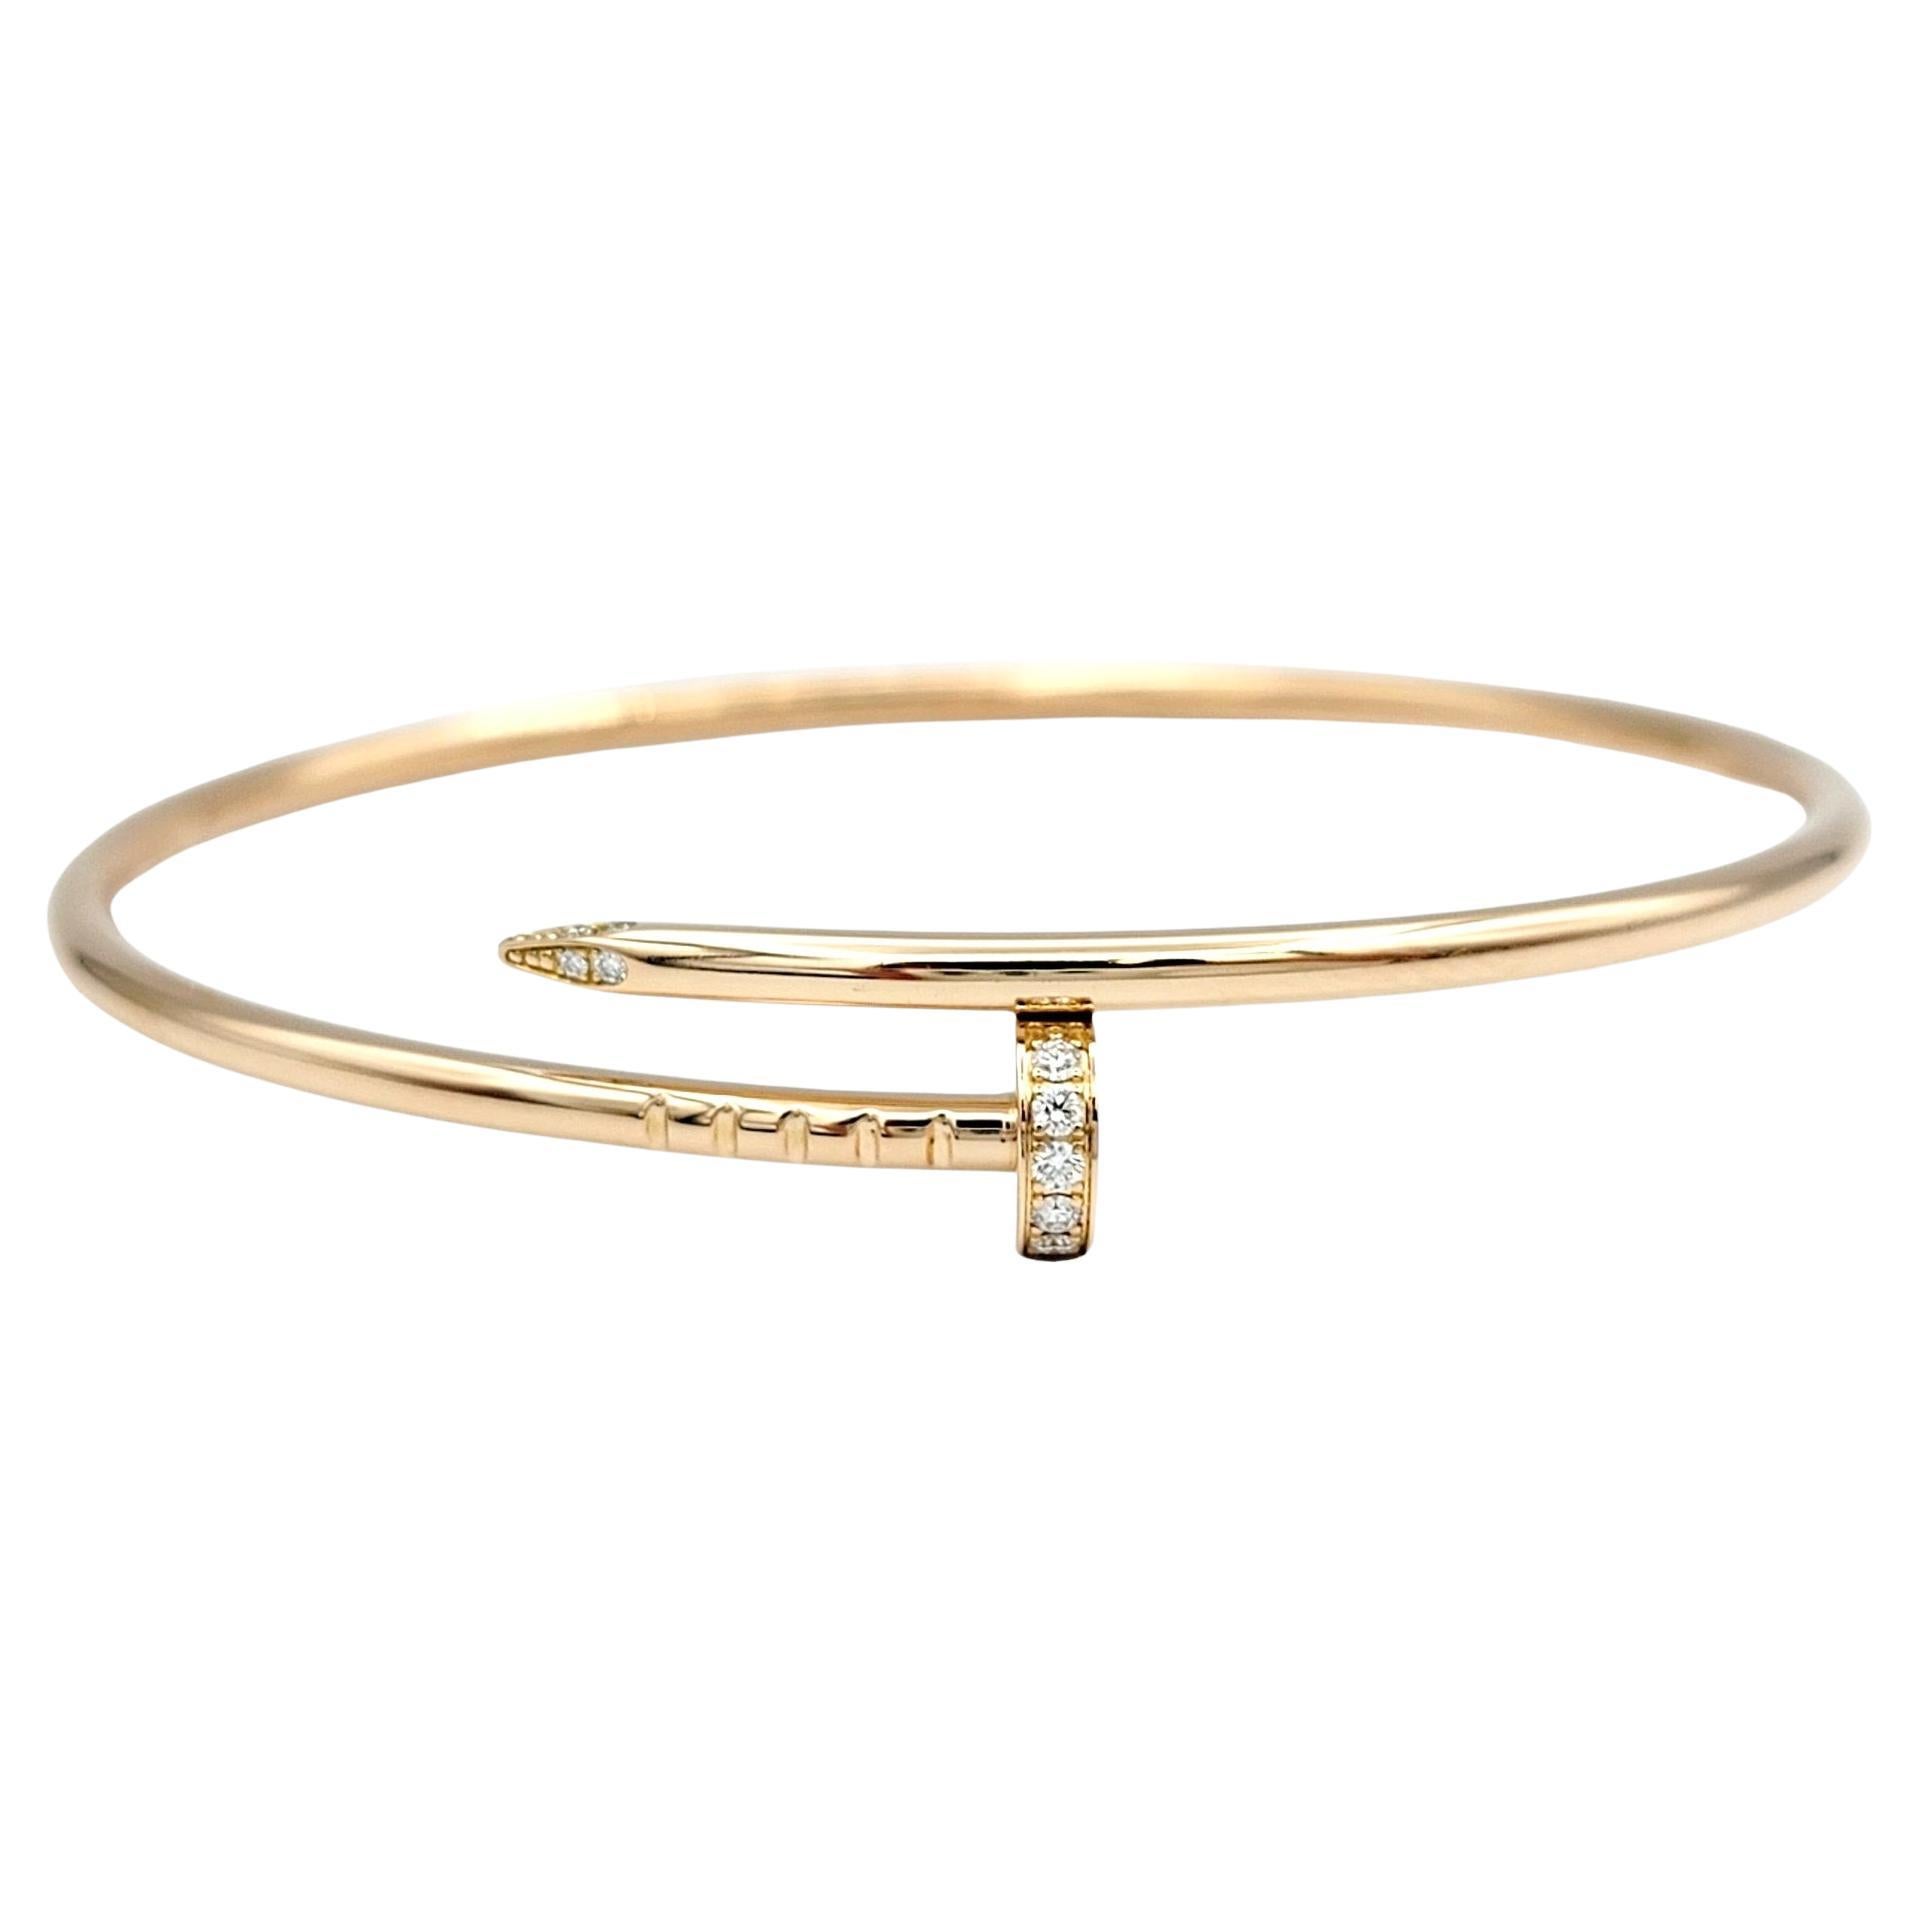 The inner circumference of this bracelet measures 6.5 inches and will comfortably fit a 5.75 - 6.25 inch wrist. 

The Cartier Juste un Clou bracelet with diamonds in 18 karat yellow gold is a striking and contemporary piece of jewelry. The bypass